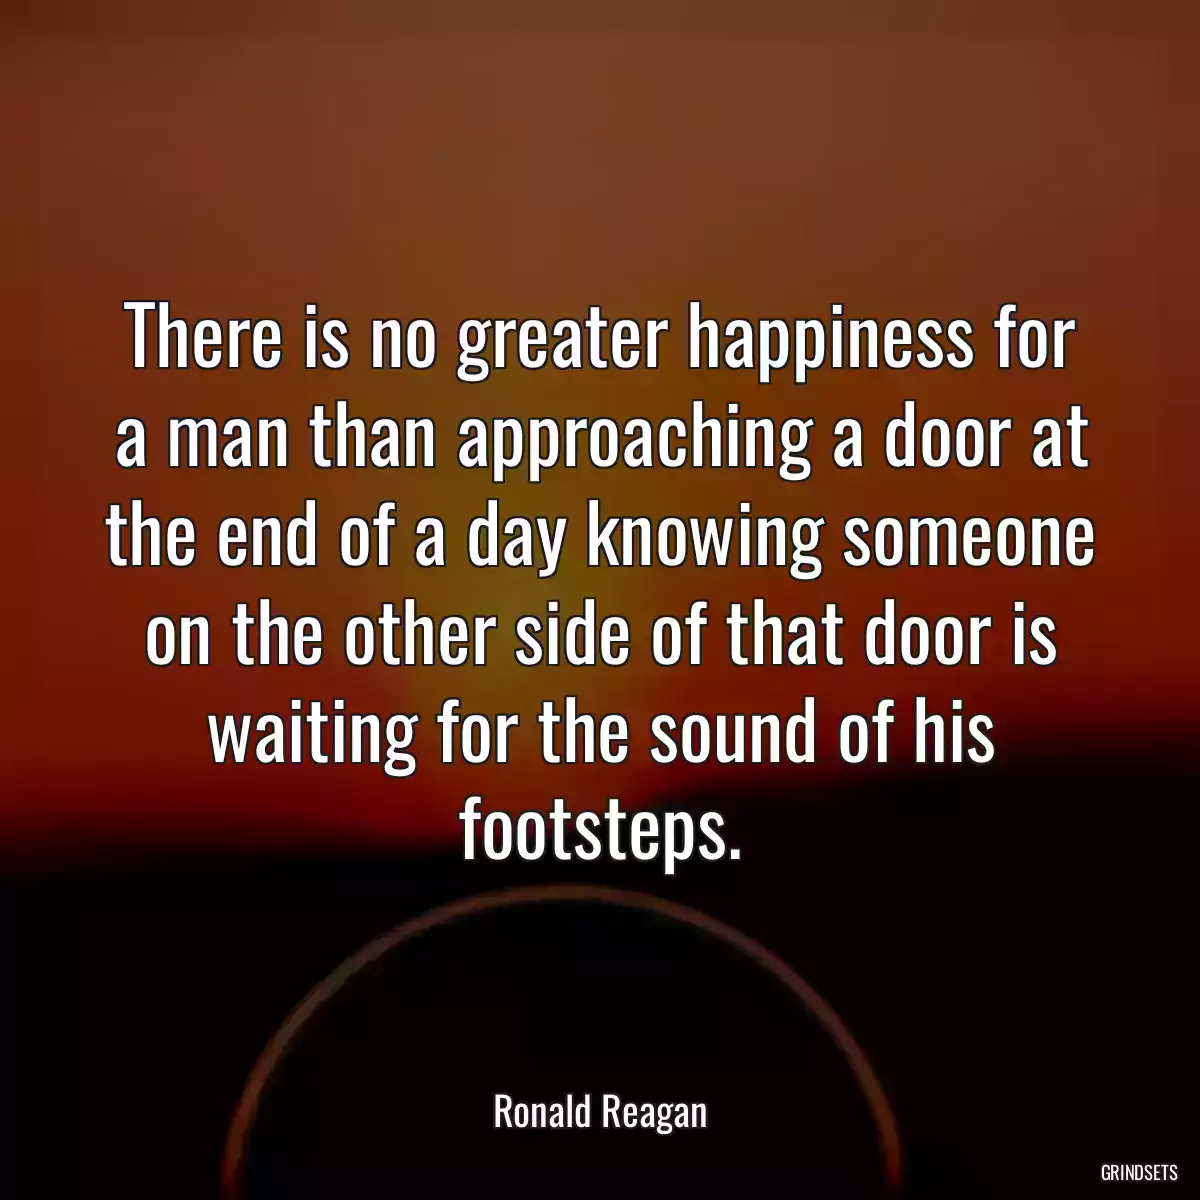 There is no greater happiness for a man than approaching a door at the end of a day knowing someone on the other side of that door is waiting for the sound of his footsteps.